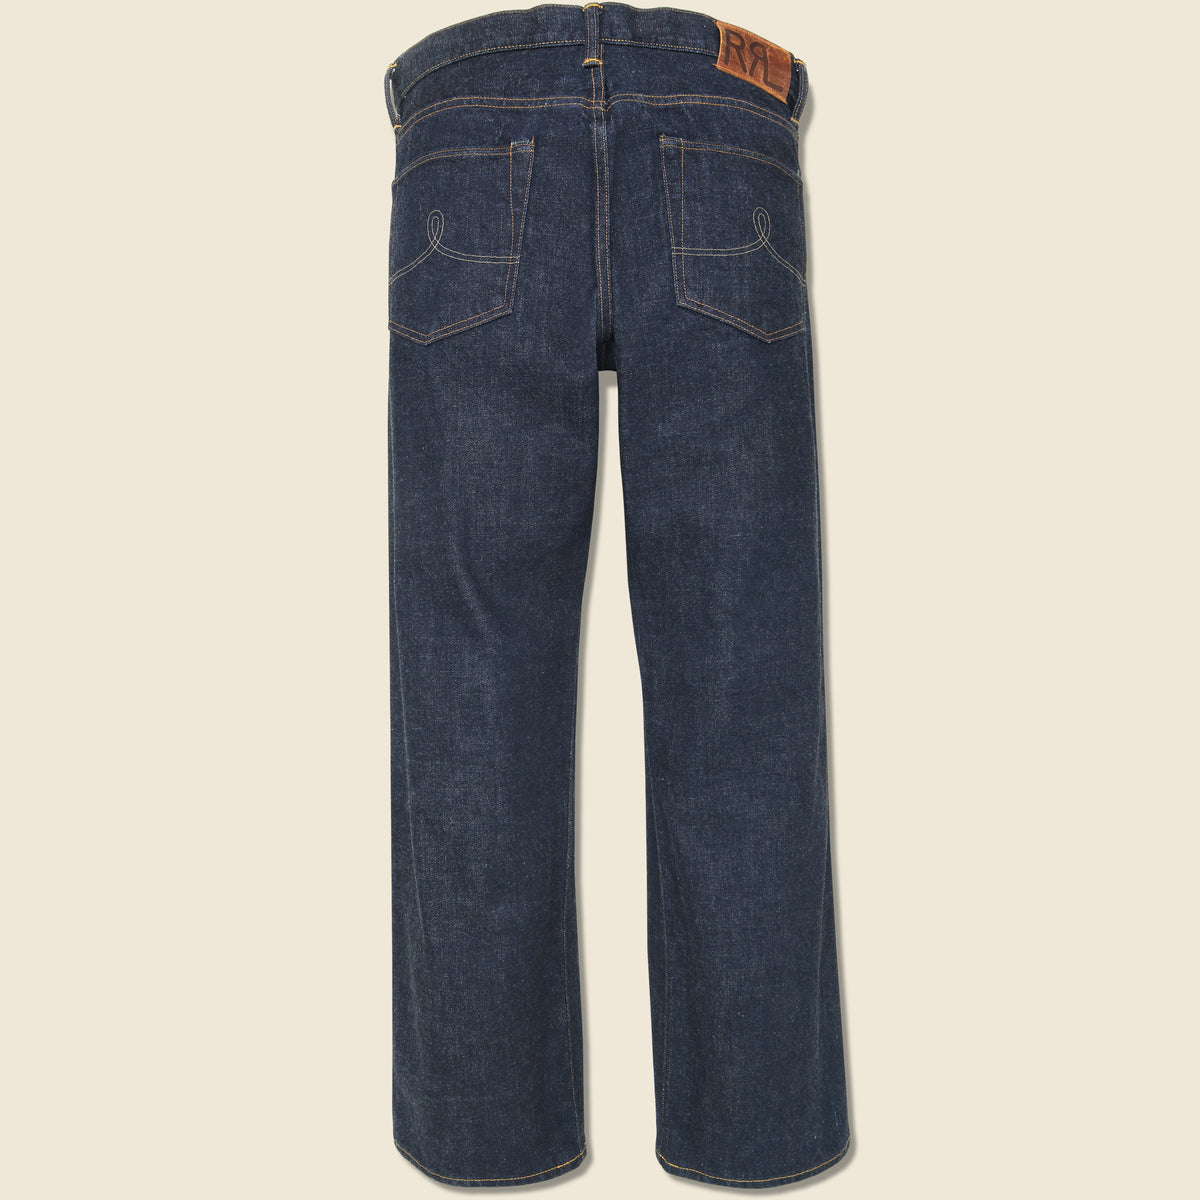 Straight Fit Selvedge Jean - East/West Rinse Wash